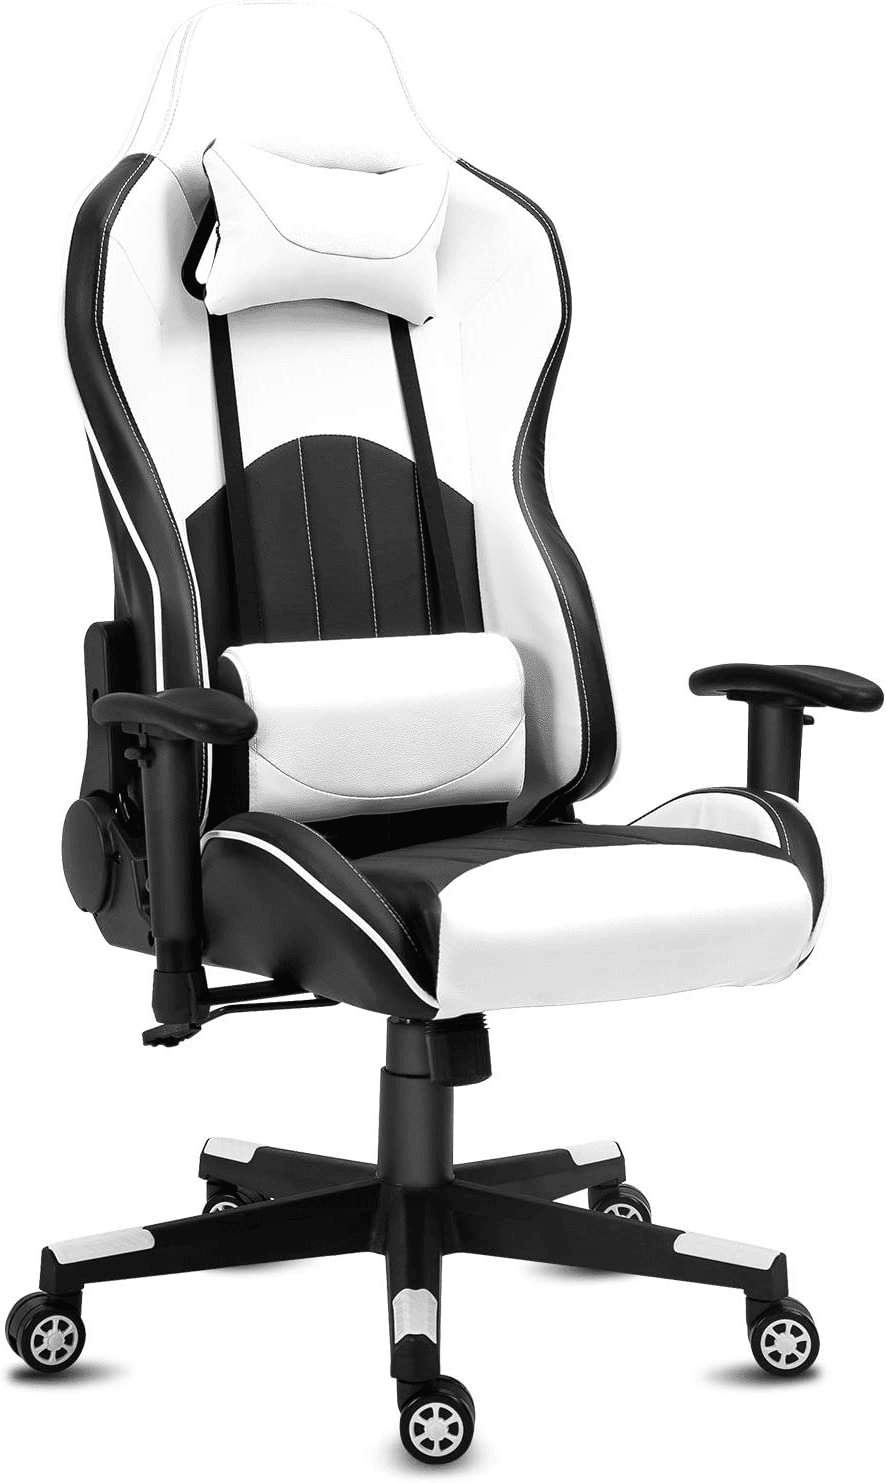 Modern Depot's Gaming Chair with Headrest Lumbar Support and Adjustable Armrests